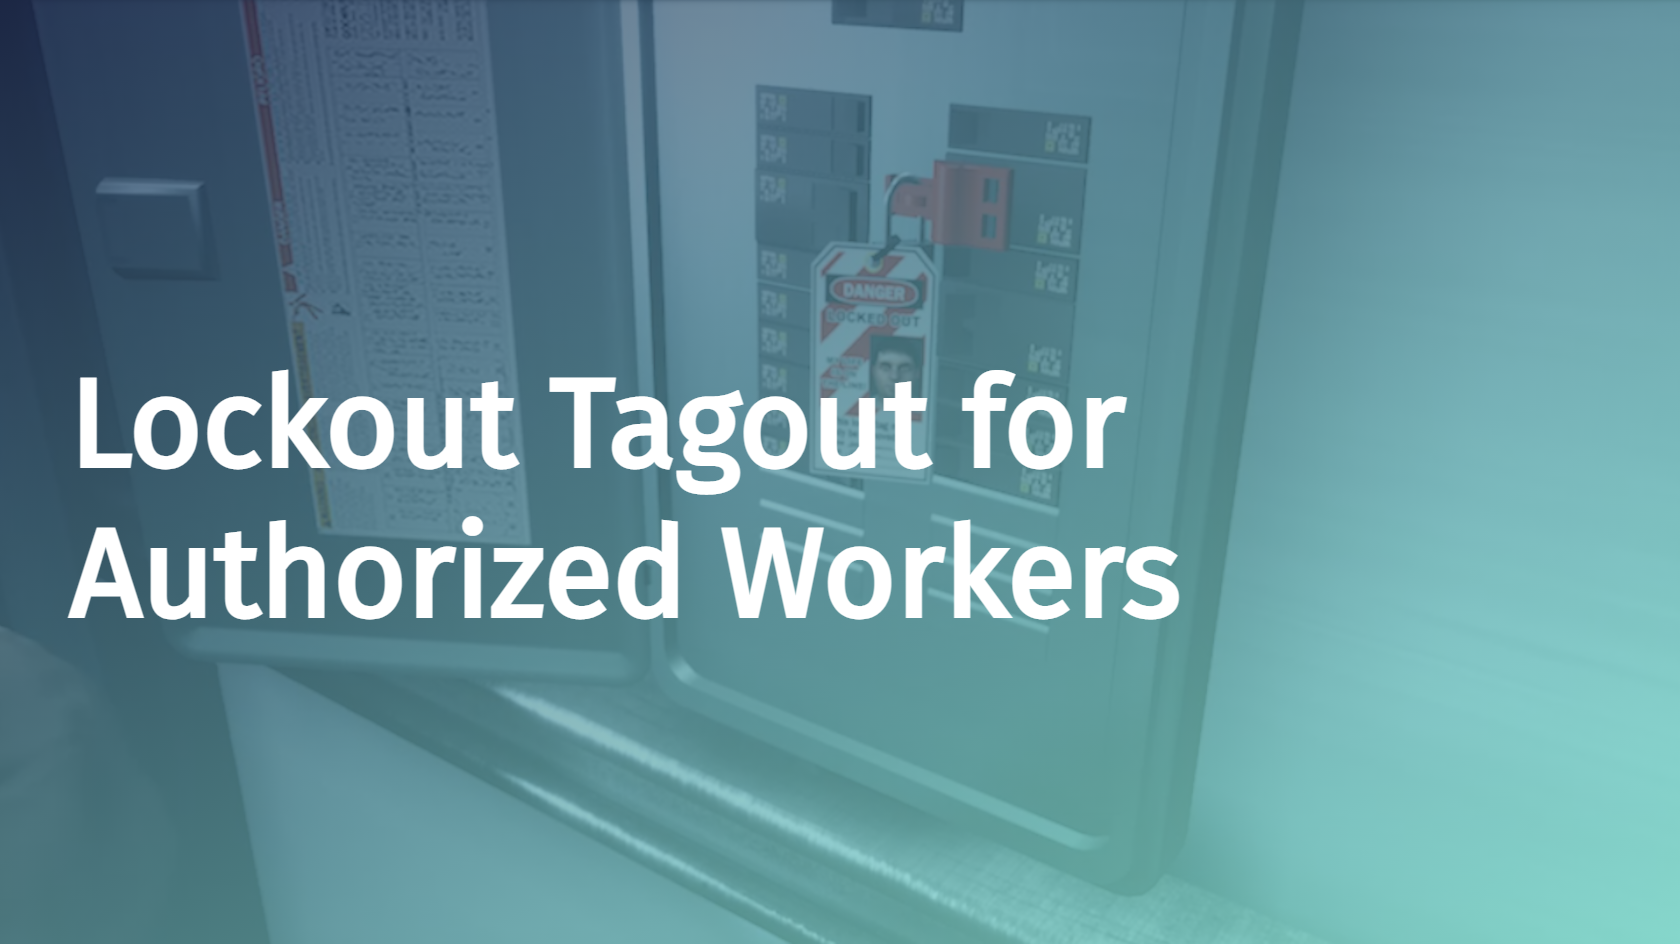 Lockout Tagout for Authorized Workers